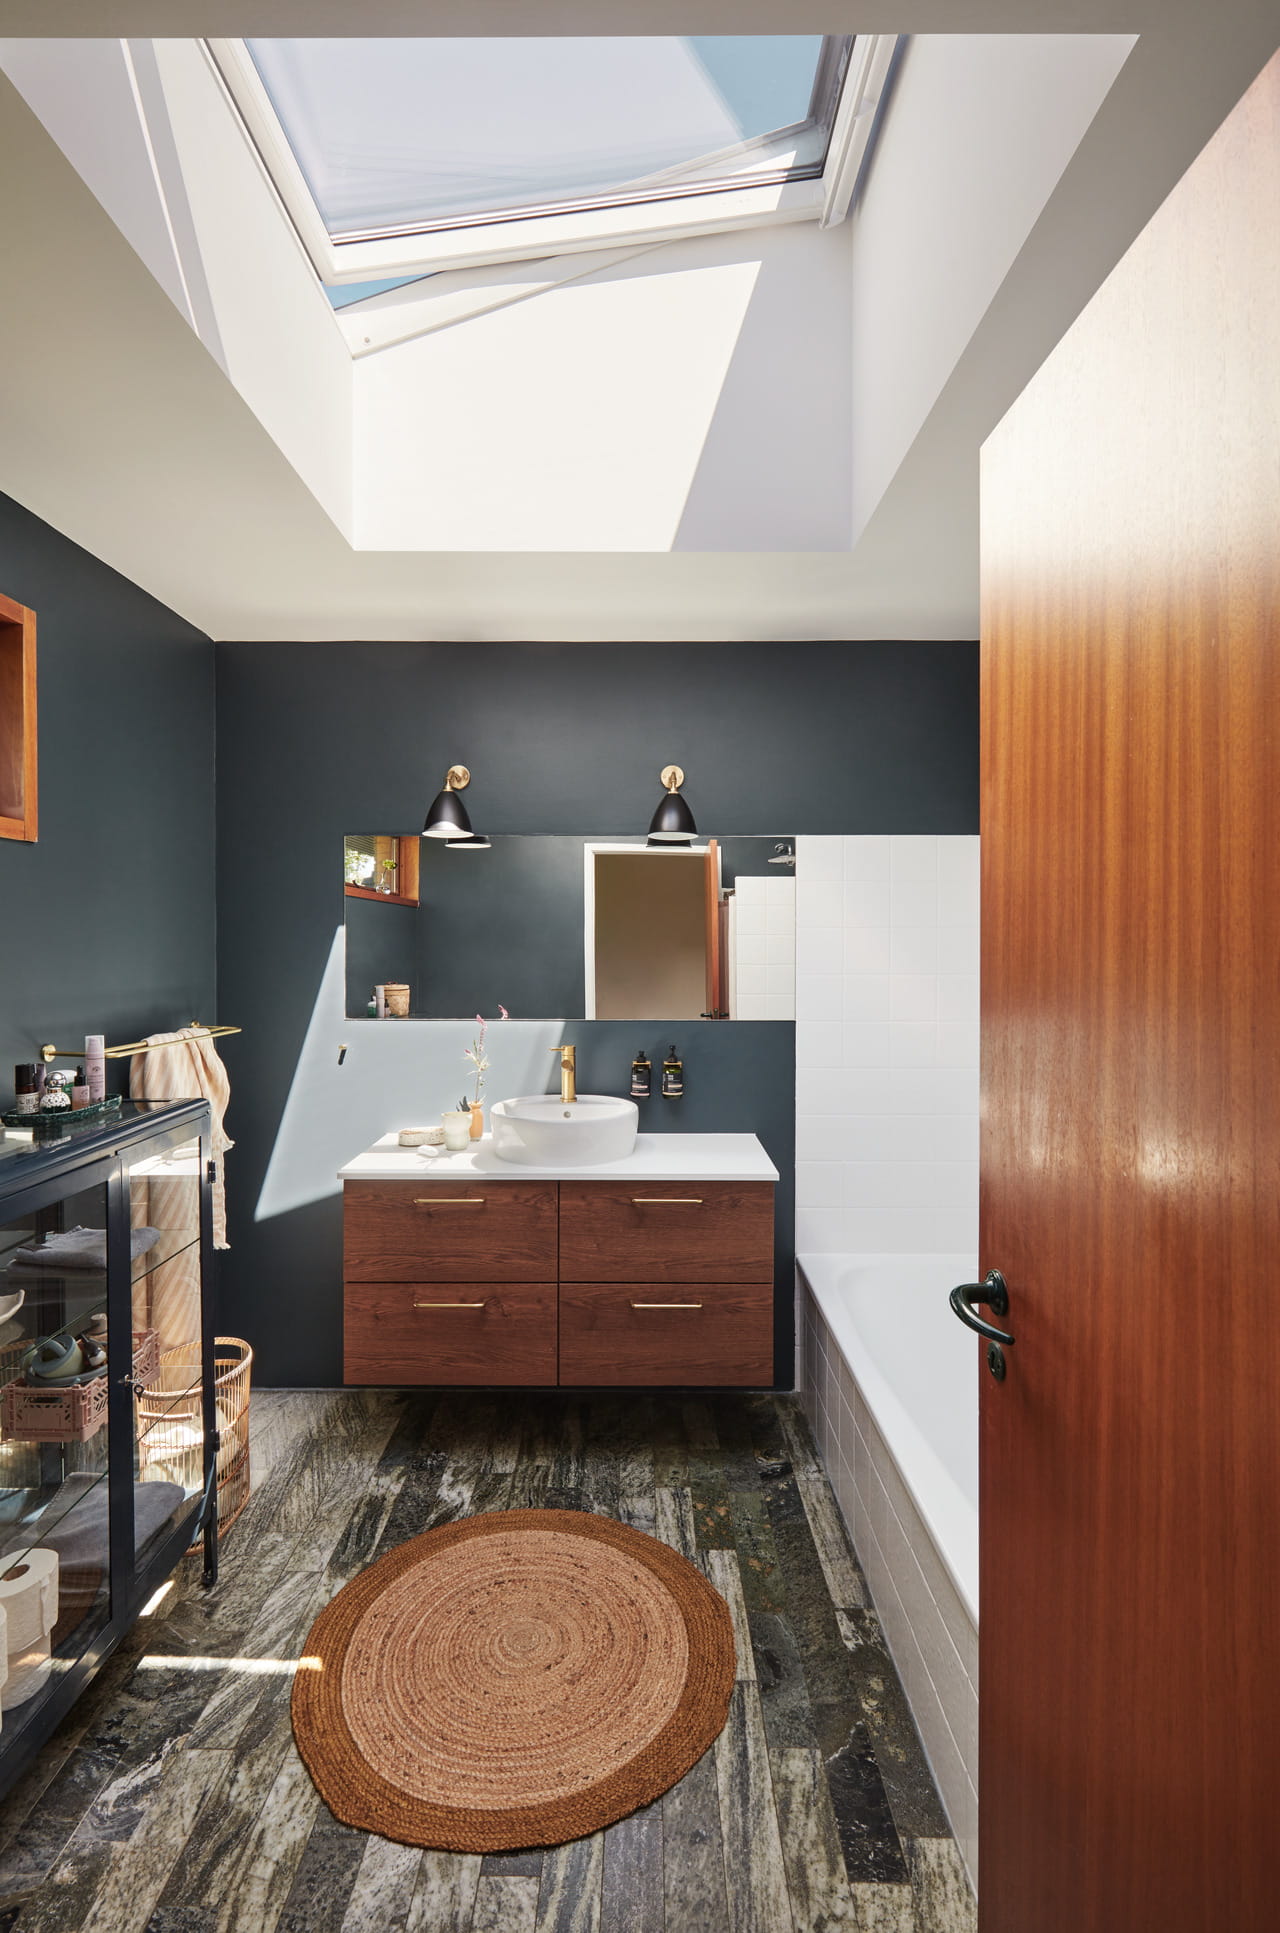 A bright bathroom with a flat roof window in the center.